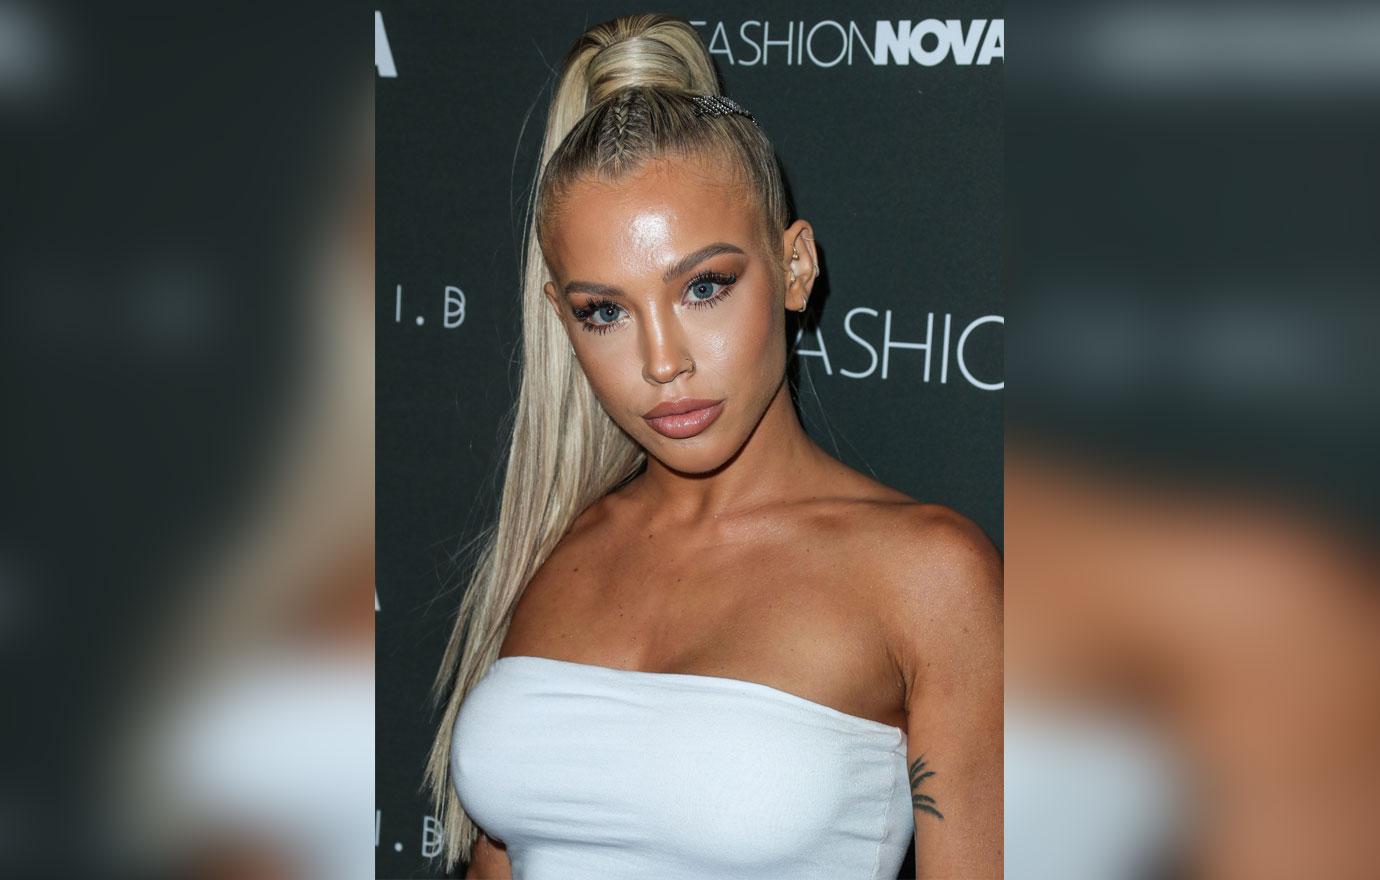 Fans slam Tammy Hembrow's braless look as 'unclassy' as she